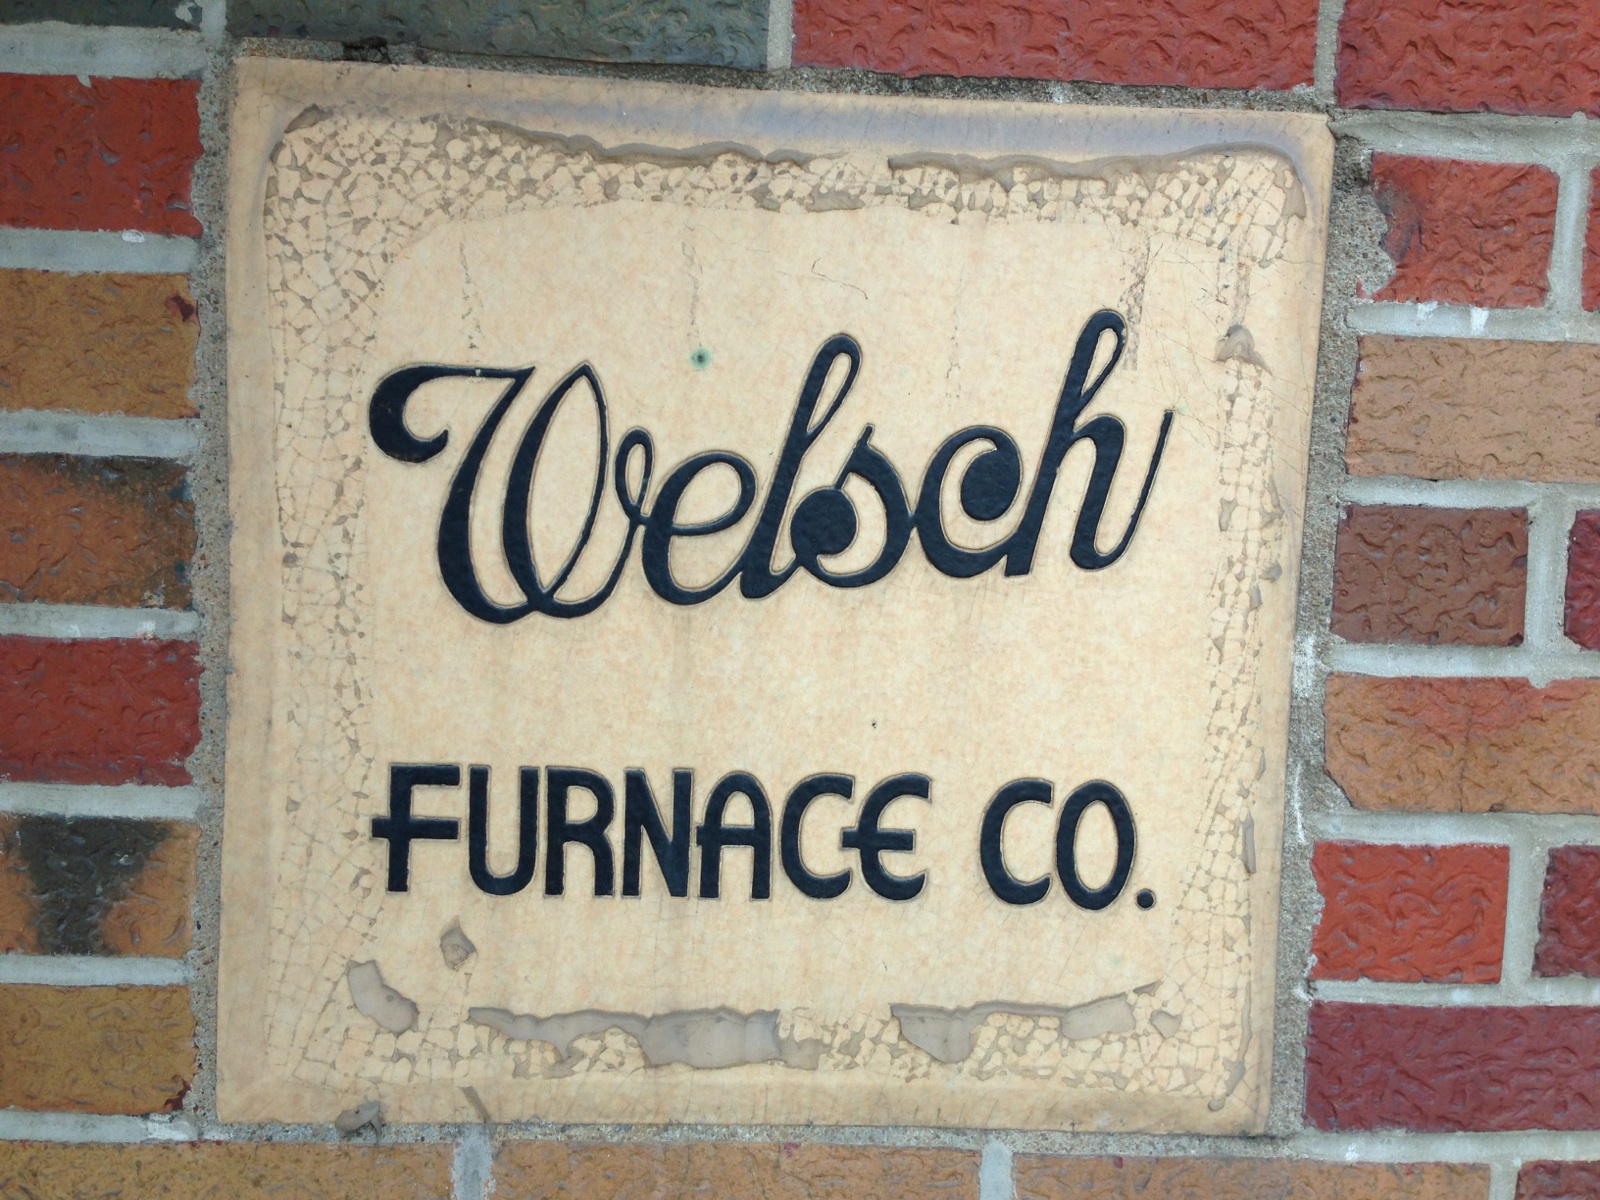 Stone at the former Welsch storefront.